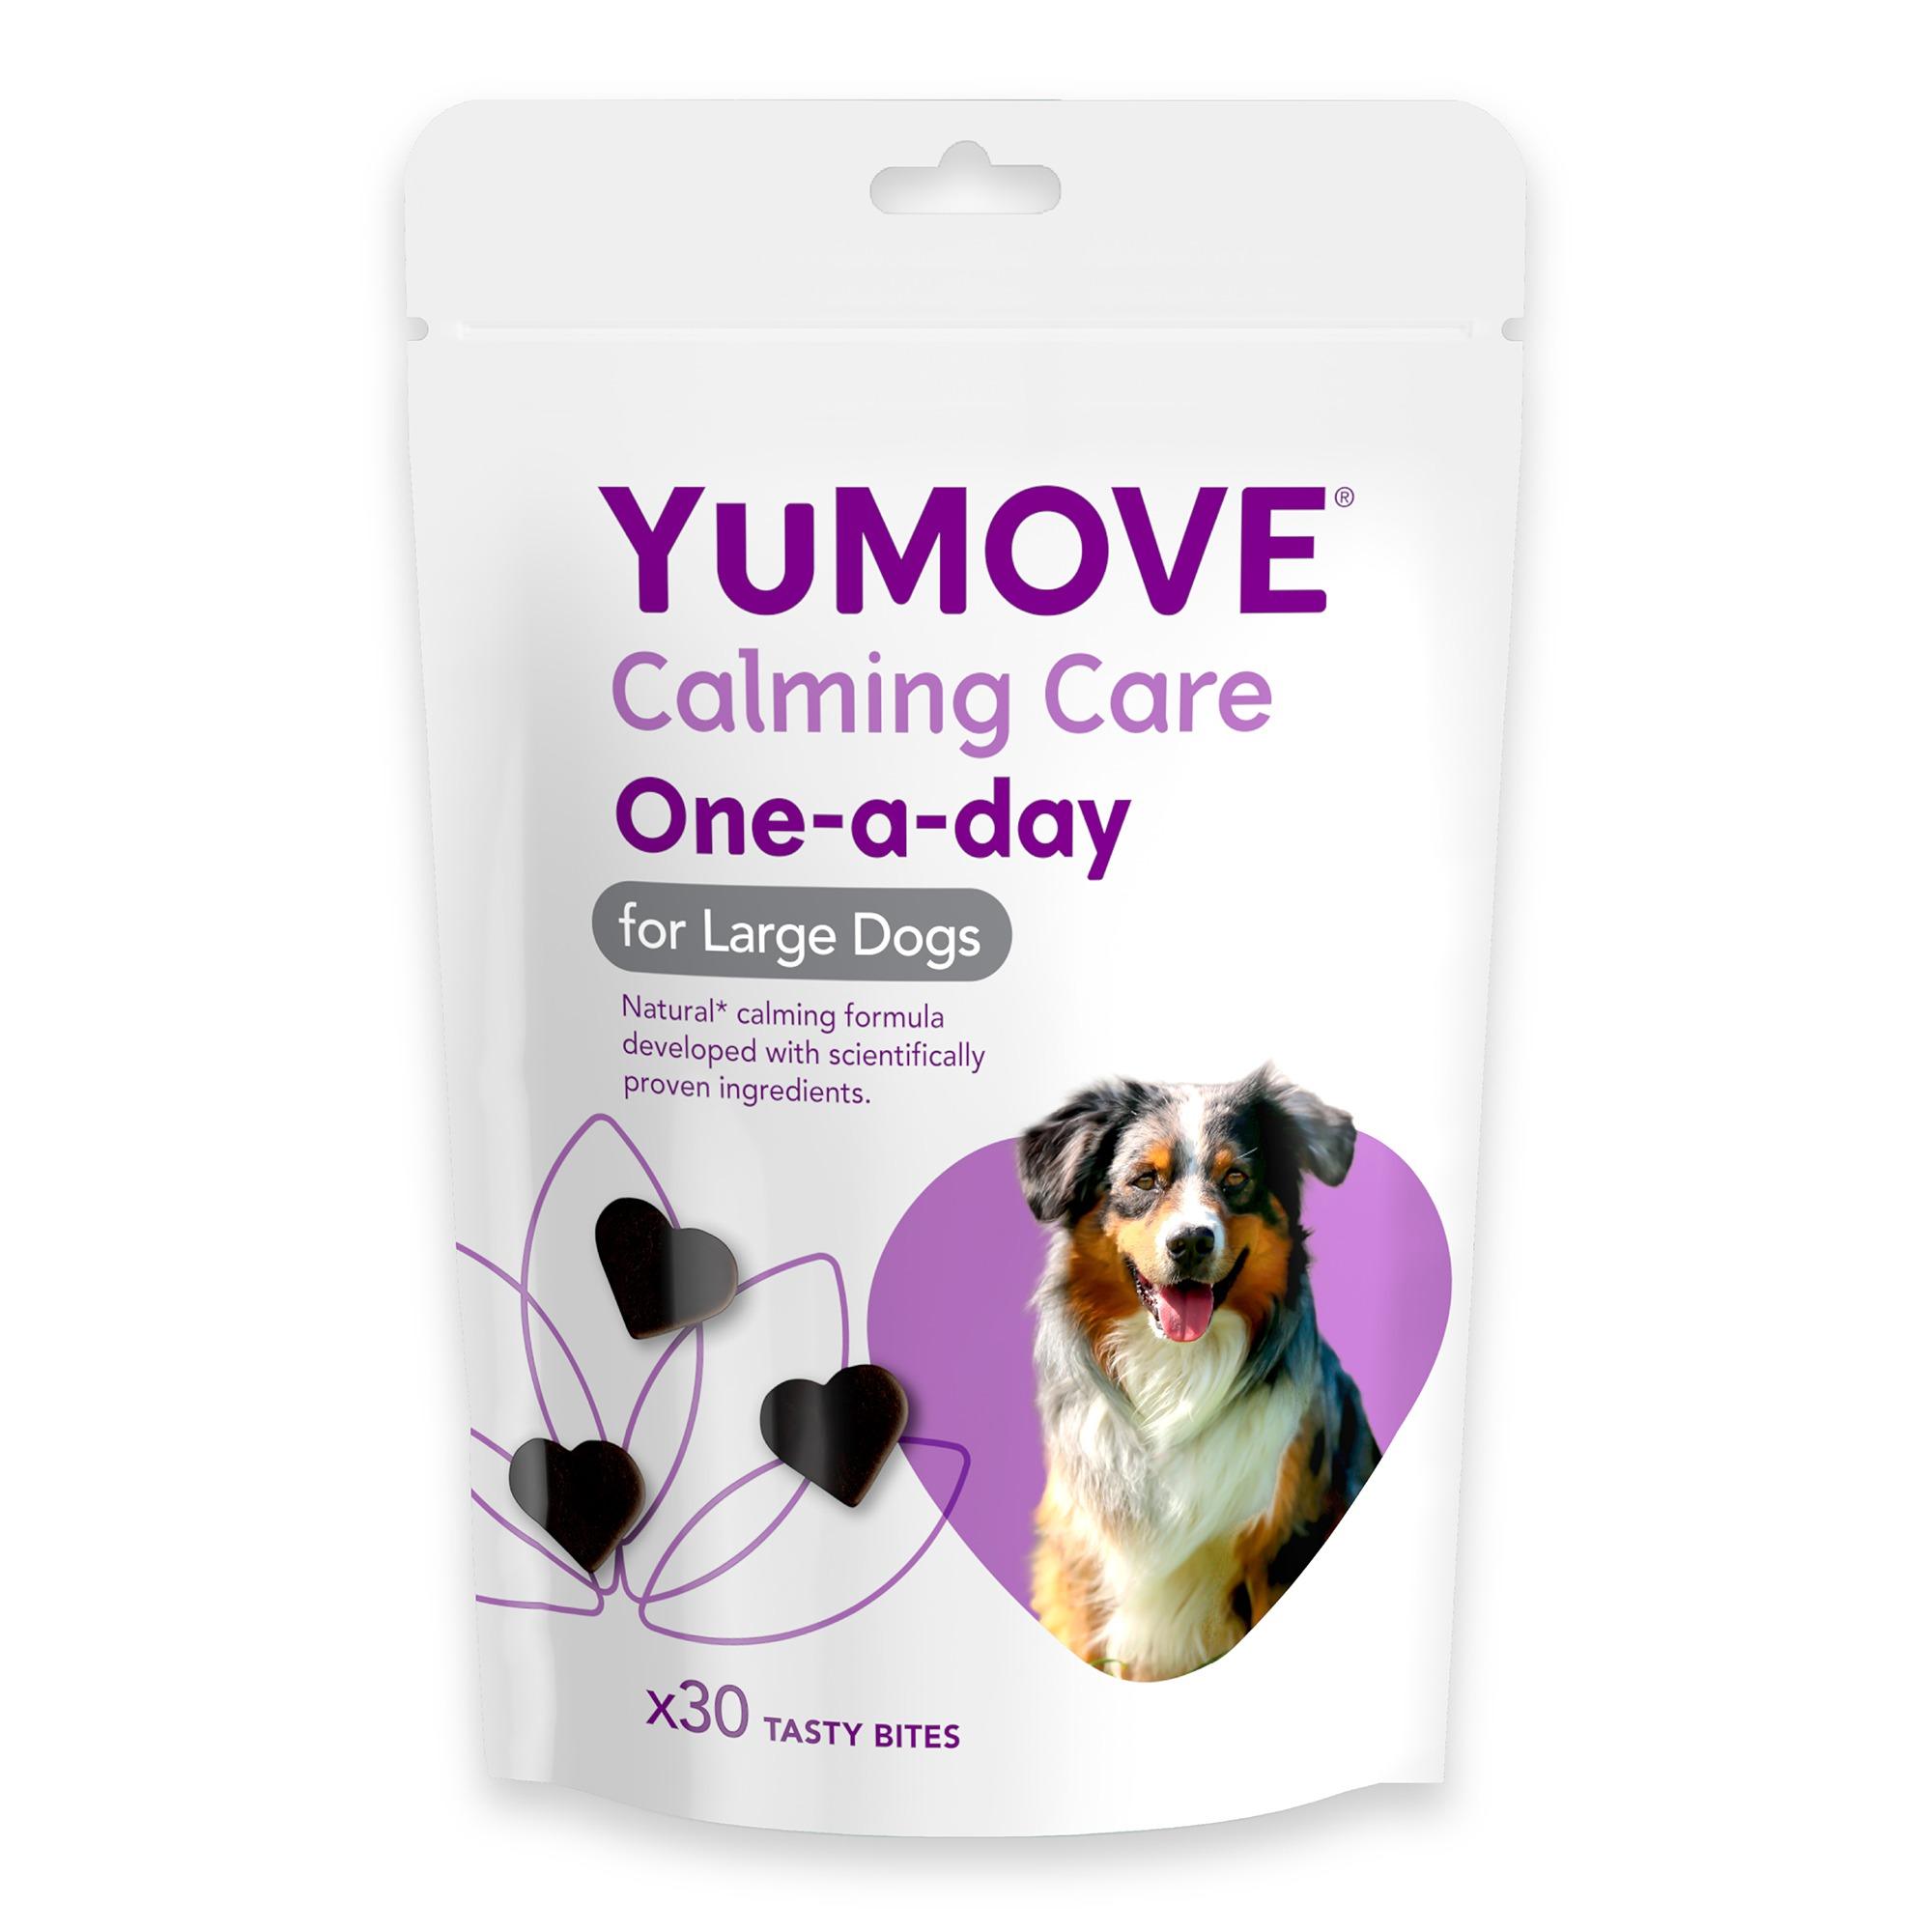 YuMOVE Calming Care One-a-day for Dogs